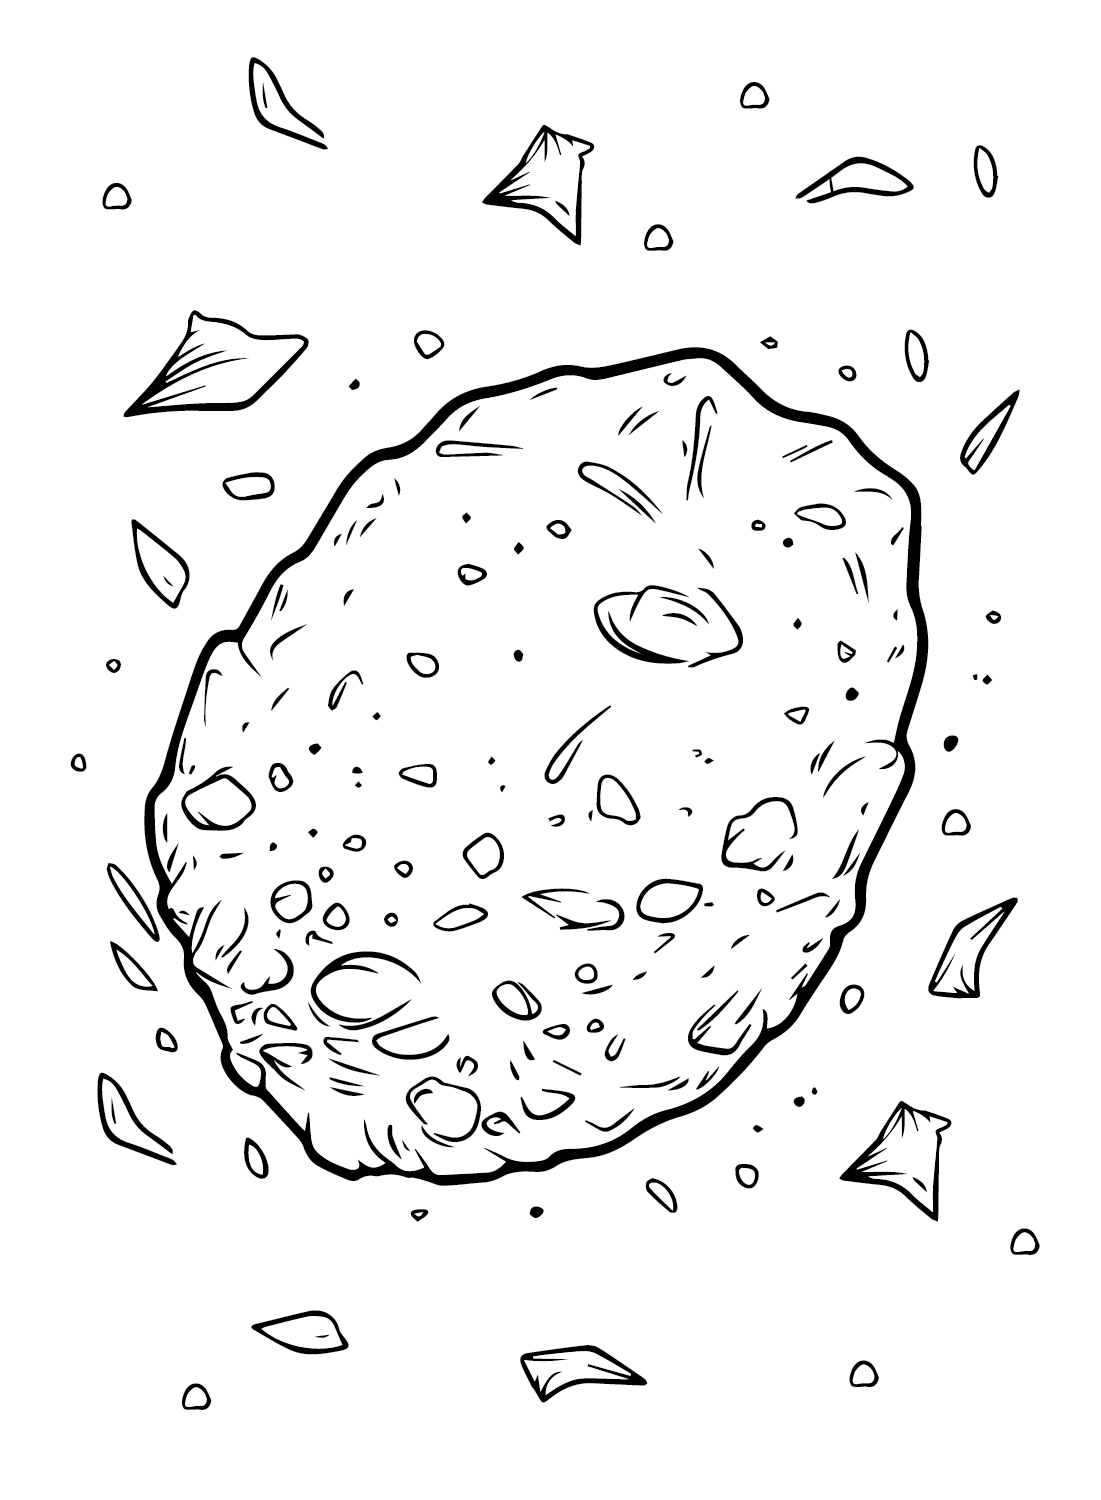 Drawing Asteroid from Asteroid